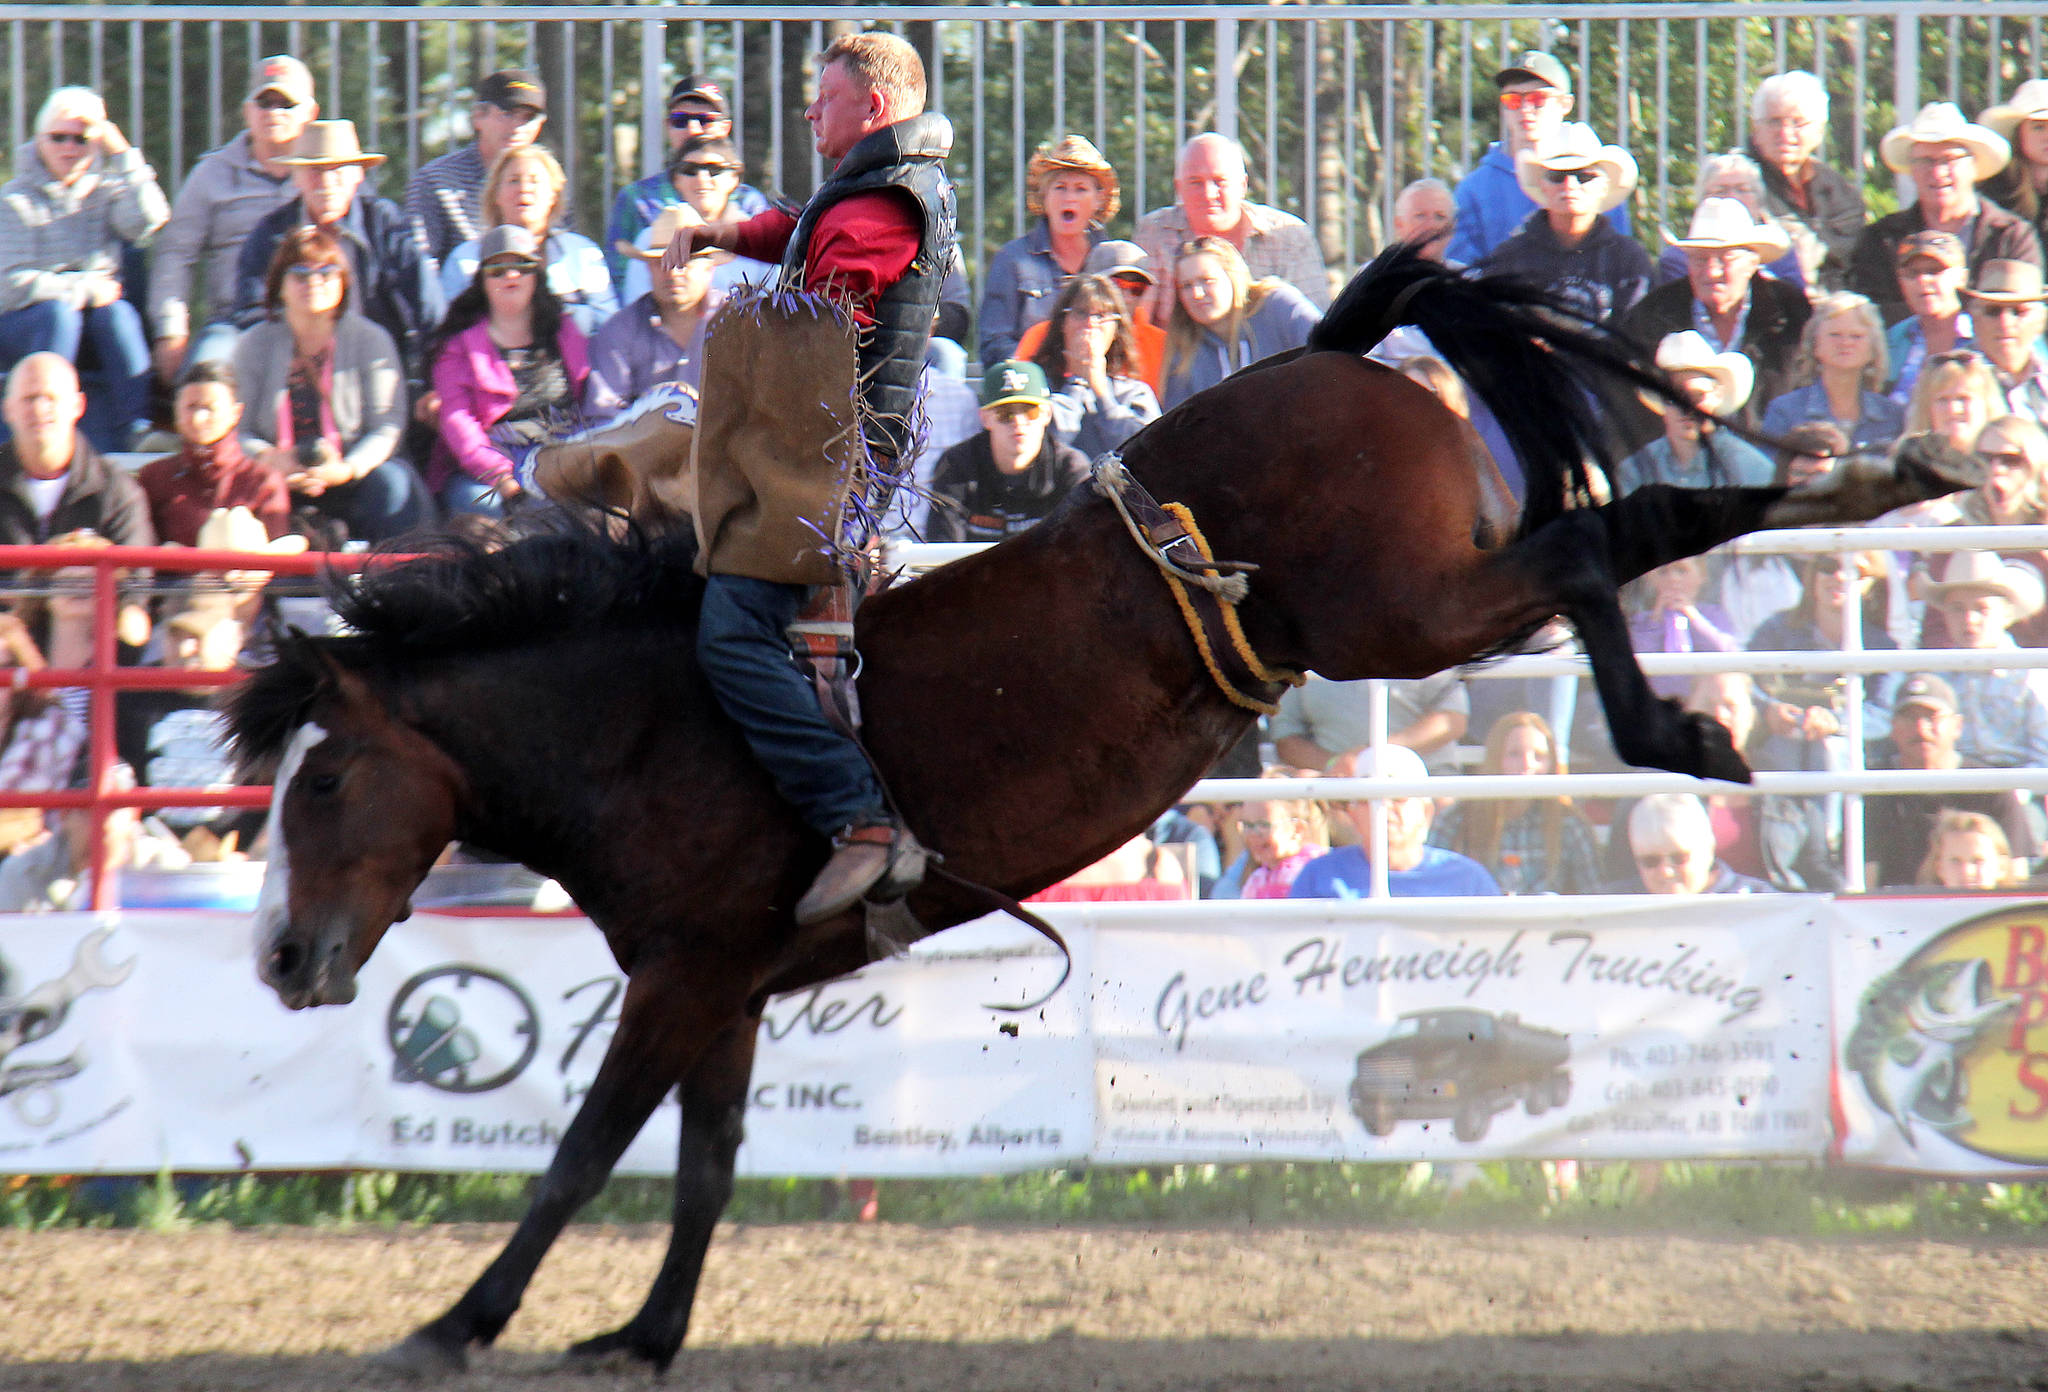 Jake Plotts is thrown around the arena while on the back of his horse during novice bareback.